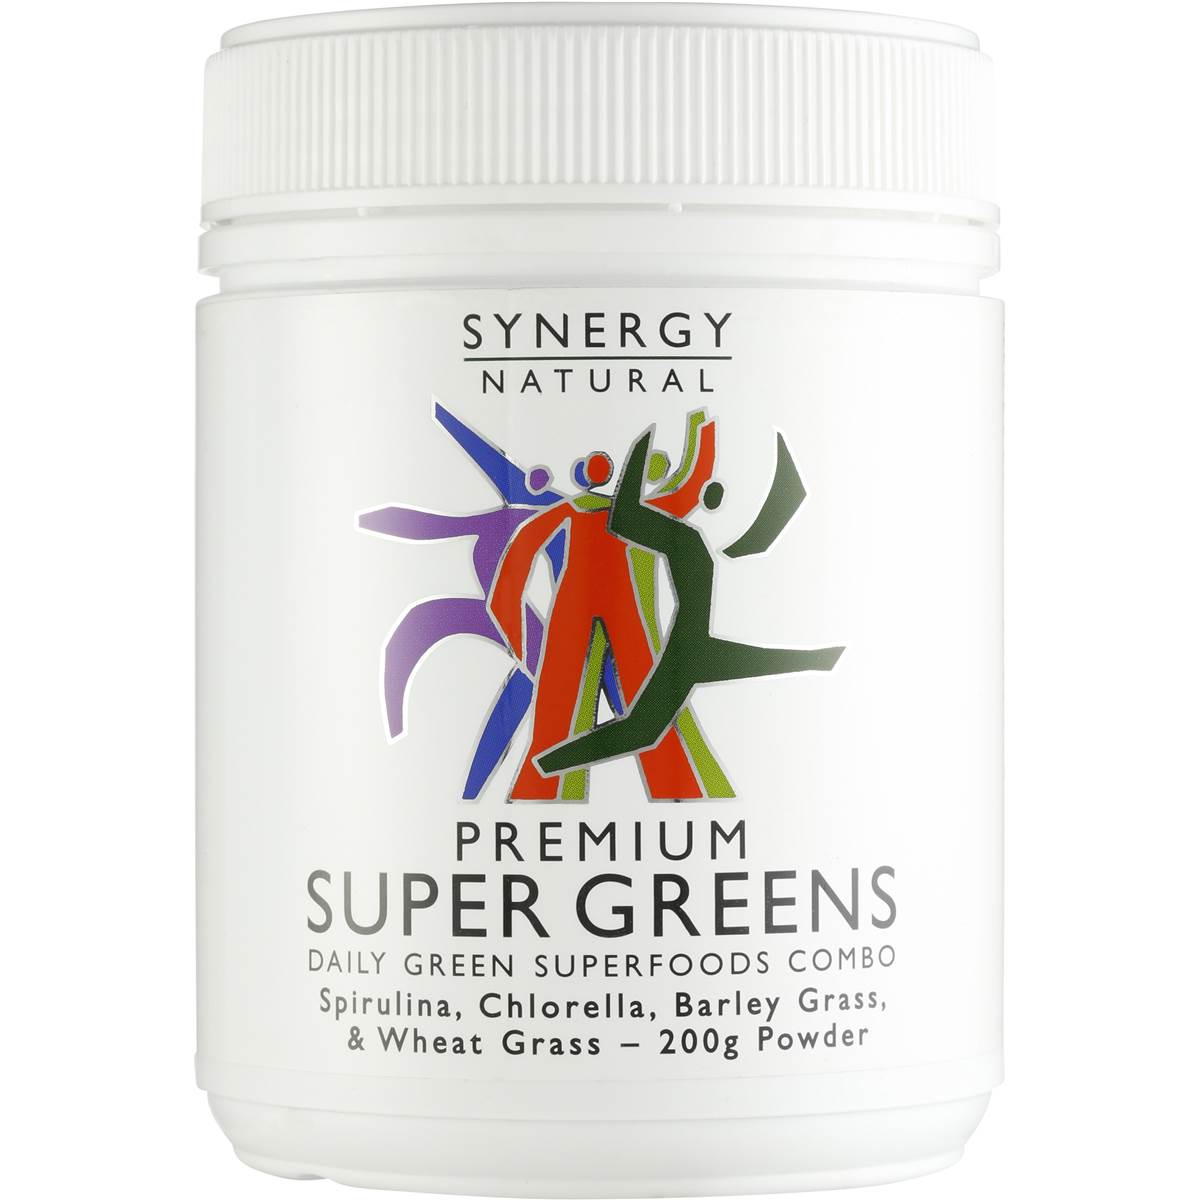 Calories in Synergy Natural Supergreens Powder